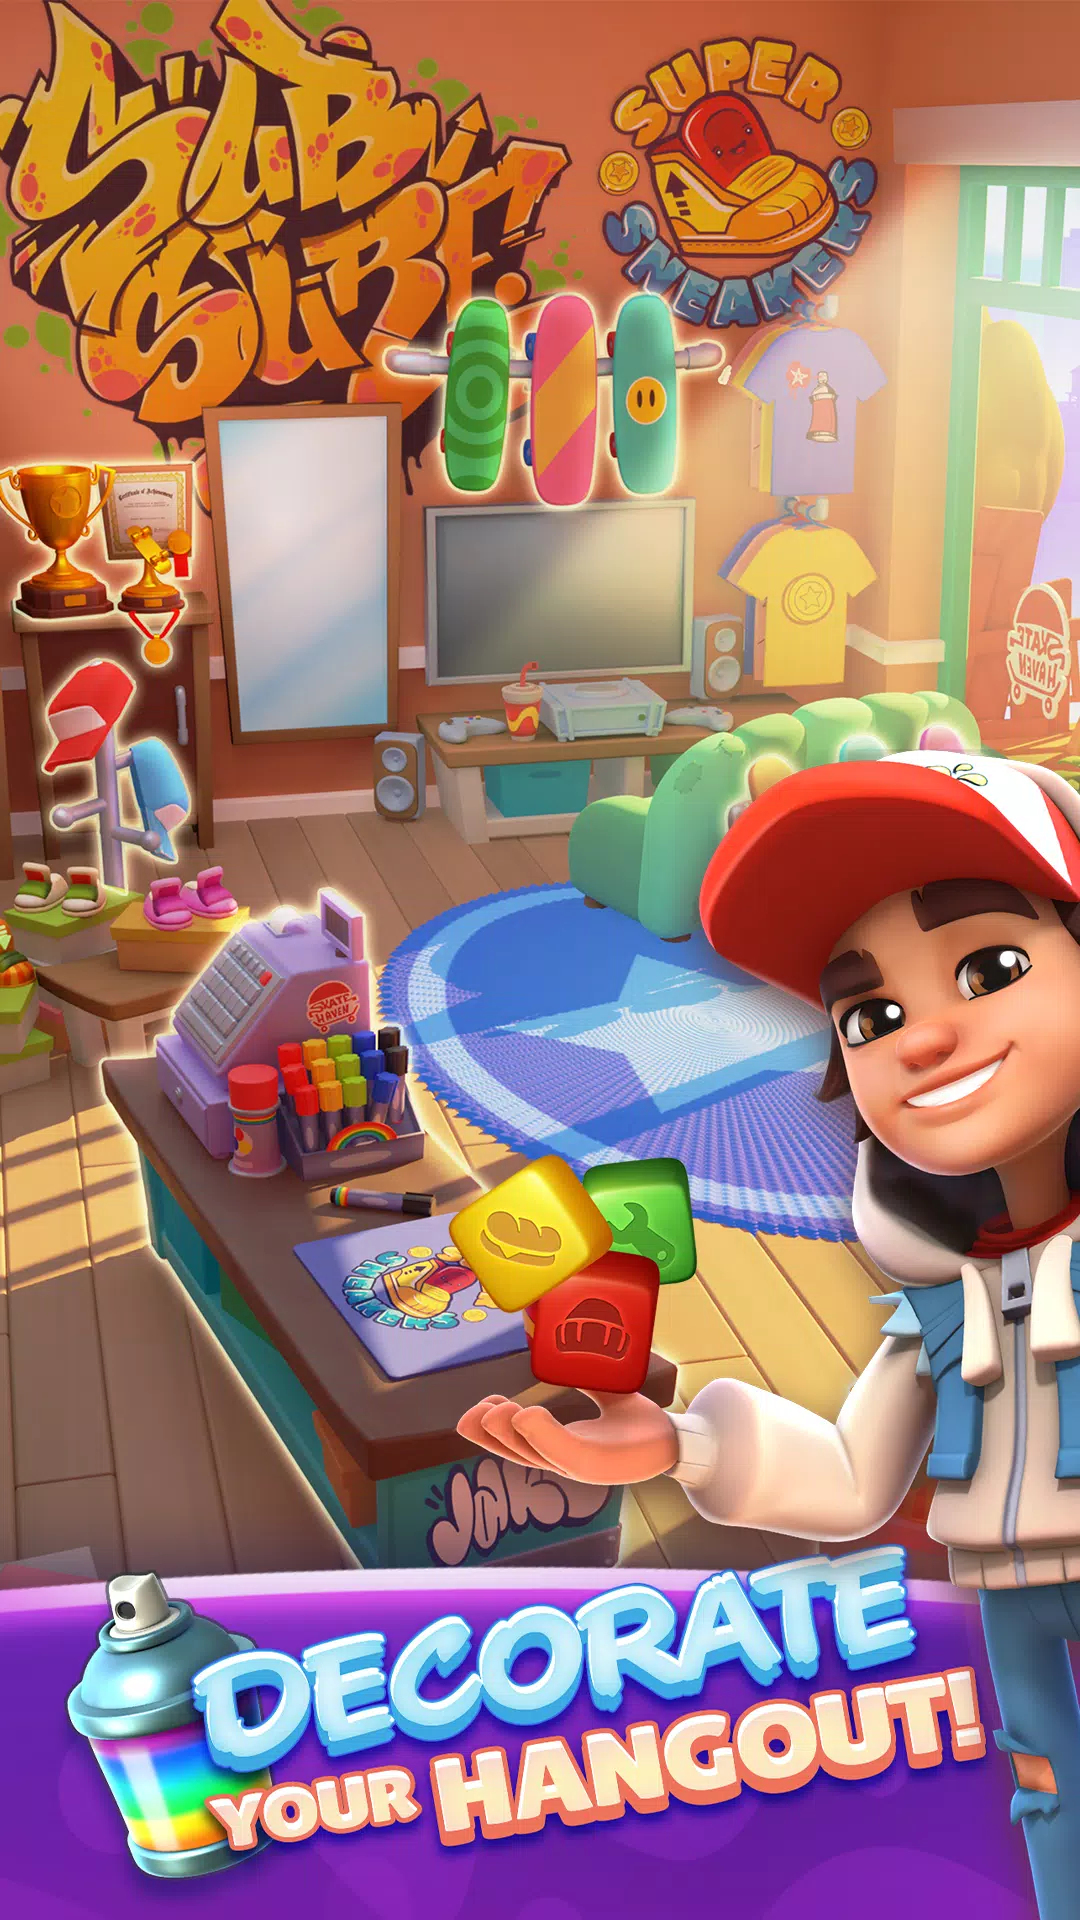 Subway Surfers Blast v1.10.1 MOD APK -  - Android & iOS MODs,  Mobile Games & Apps